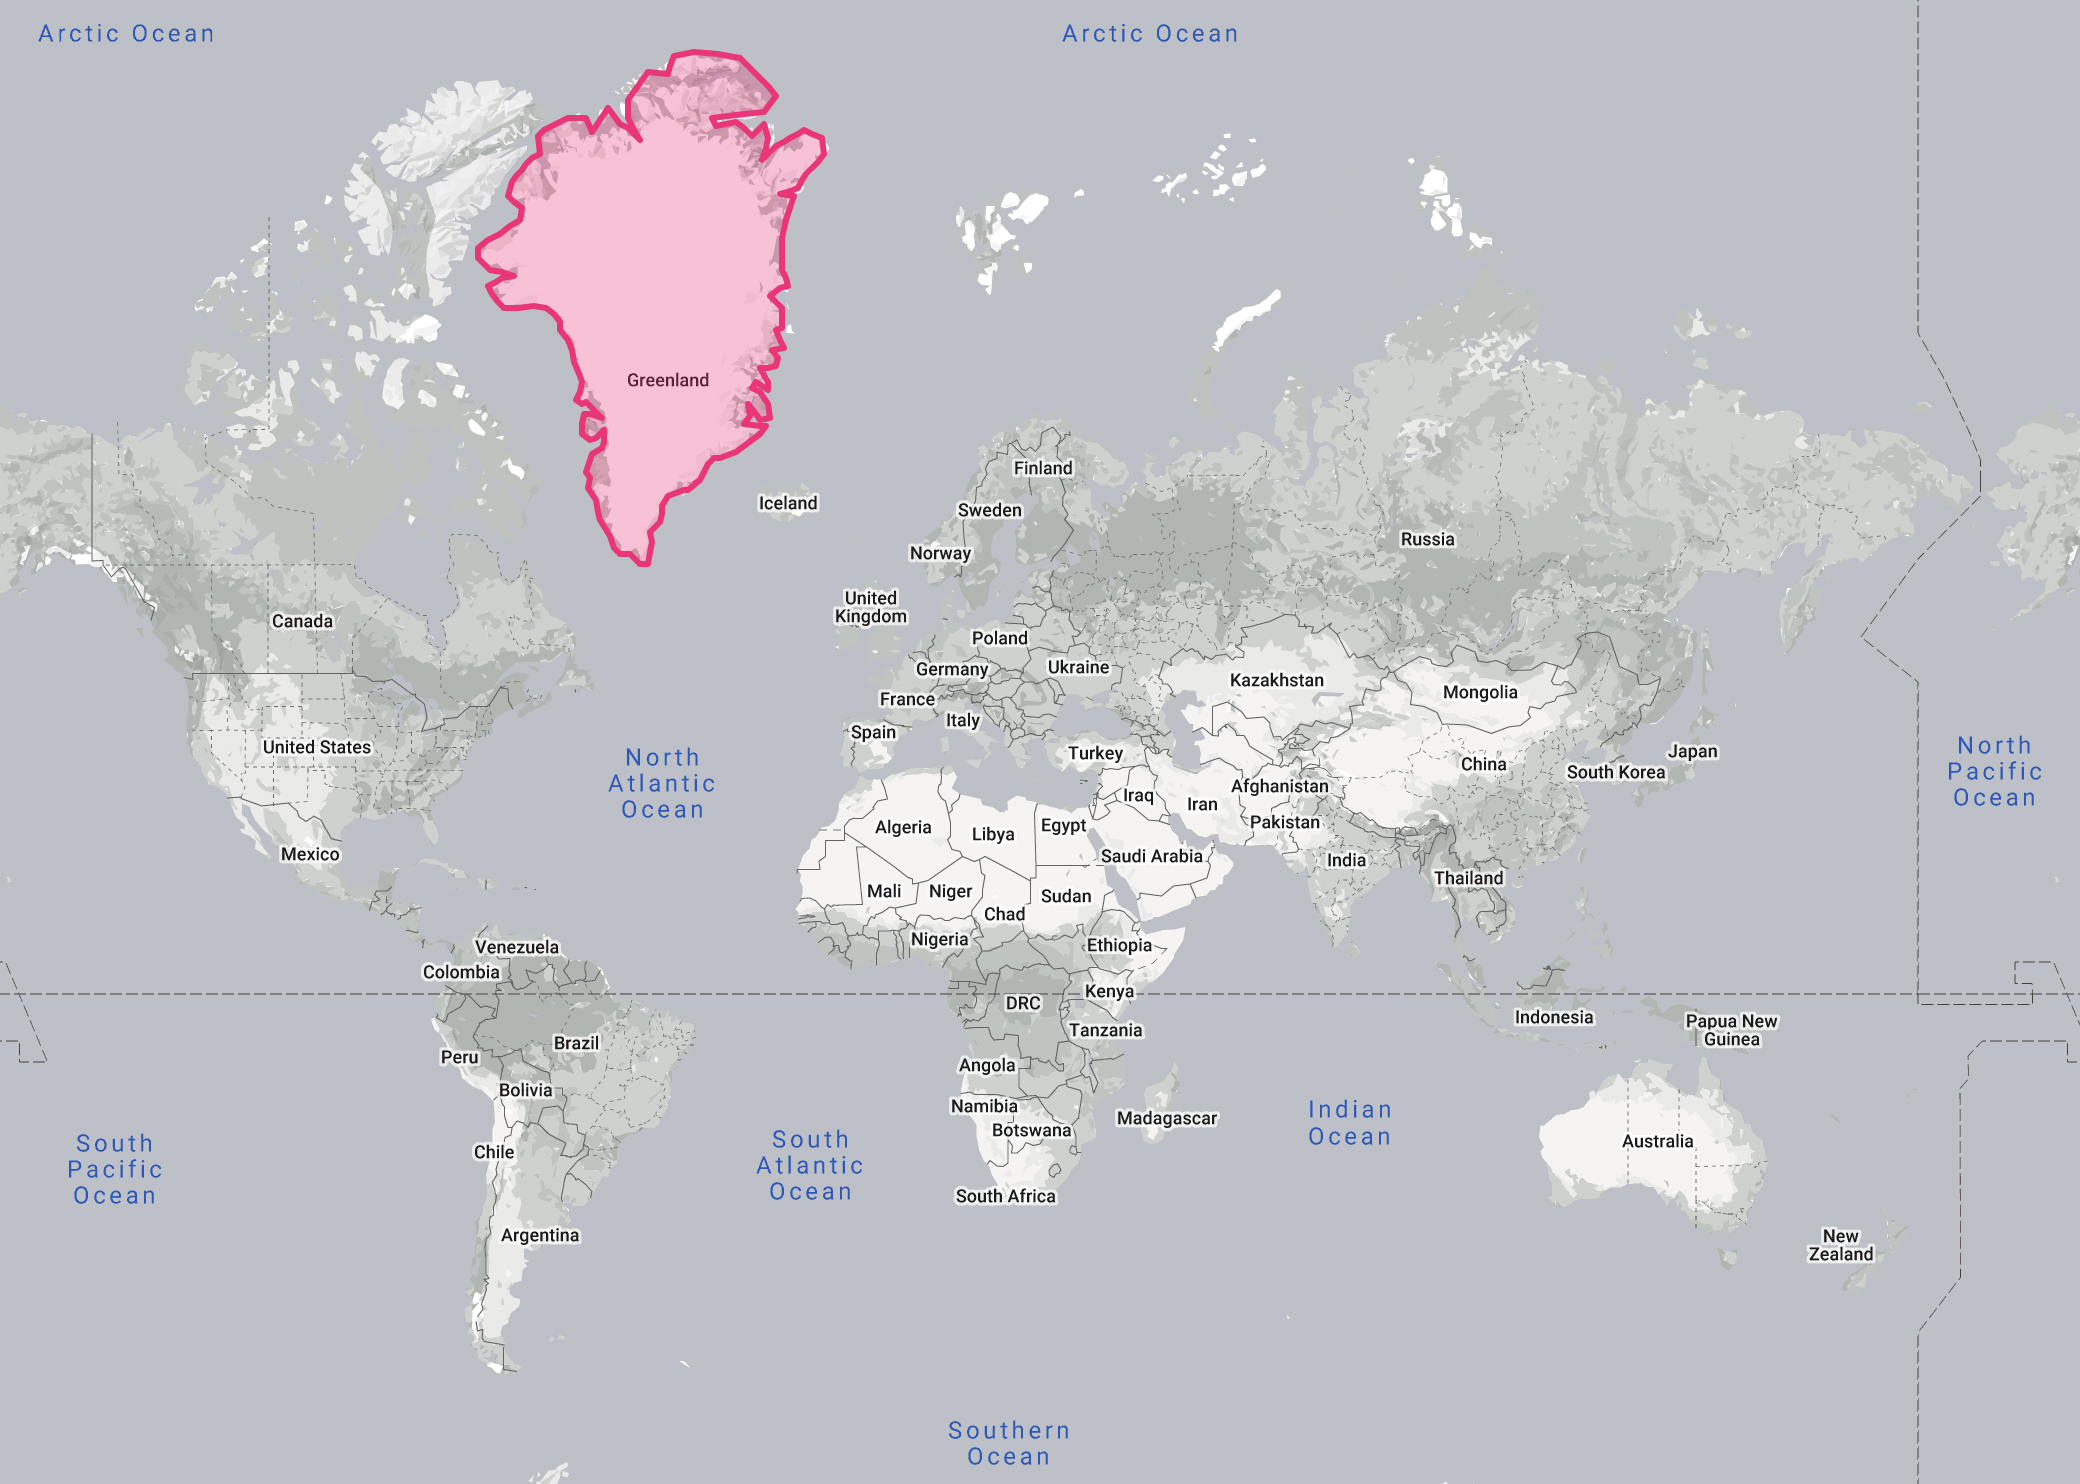 A world map in the Mercator projection, with Greenland highlighted in pink